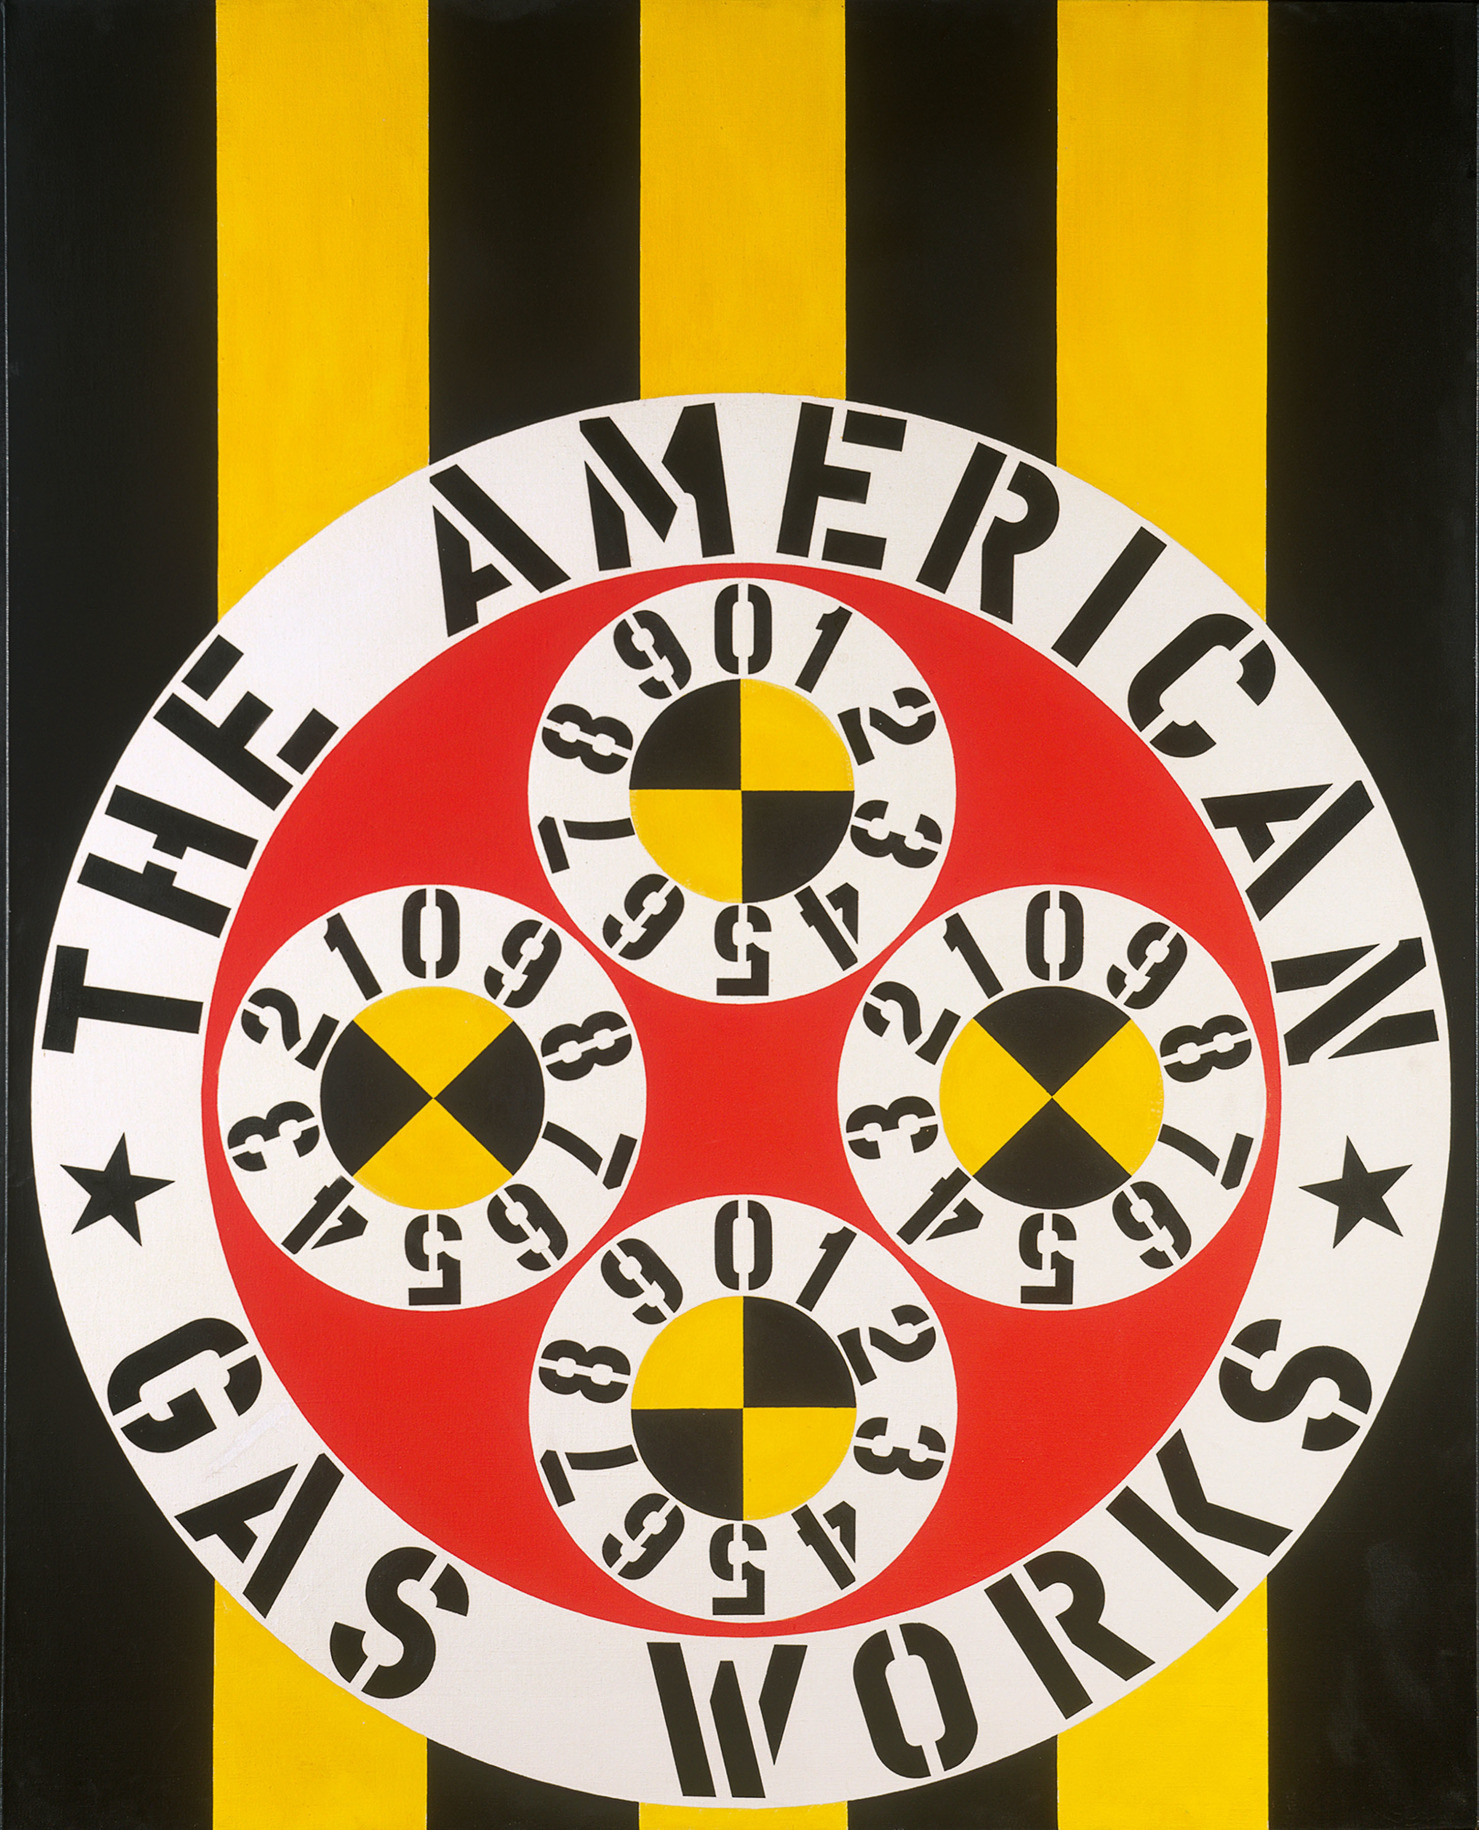 A 60 by 48 inch painting of a large circular image against a background of yellow and black vertical stripes. A large red circle contains four smaller circles, each quartered into yellow and black diamonds and surrounded by white ring containing the numerals 0 through 9 painted in black. Surrounding the red circle is a white ring containing the painting's title &quot;The American Gas Works,&quot; painted in black letters, and two small black stars.